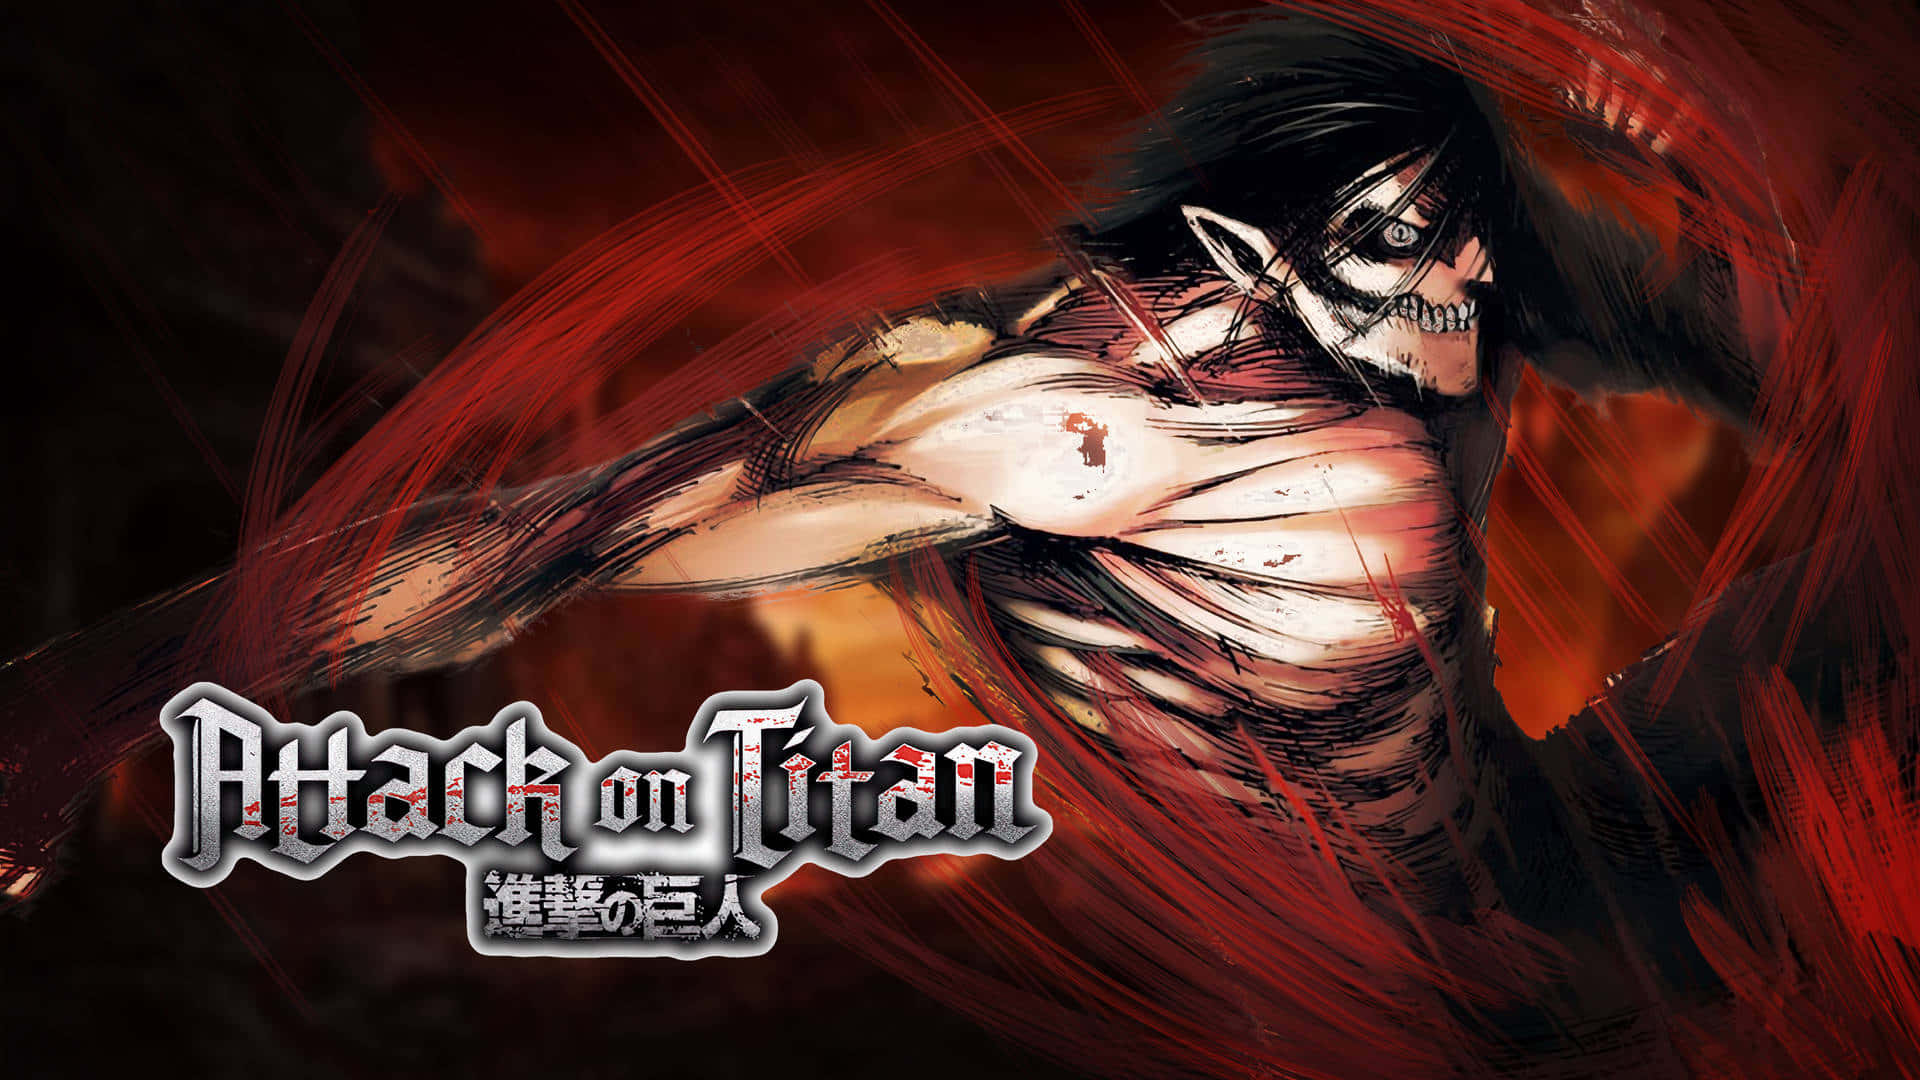 Ready for Epic Battles? Join the Fight in the Attack on Titan Video Game. Wallpaper